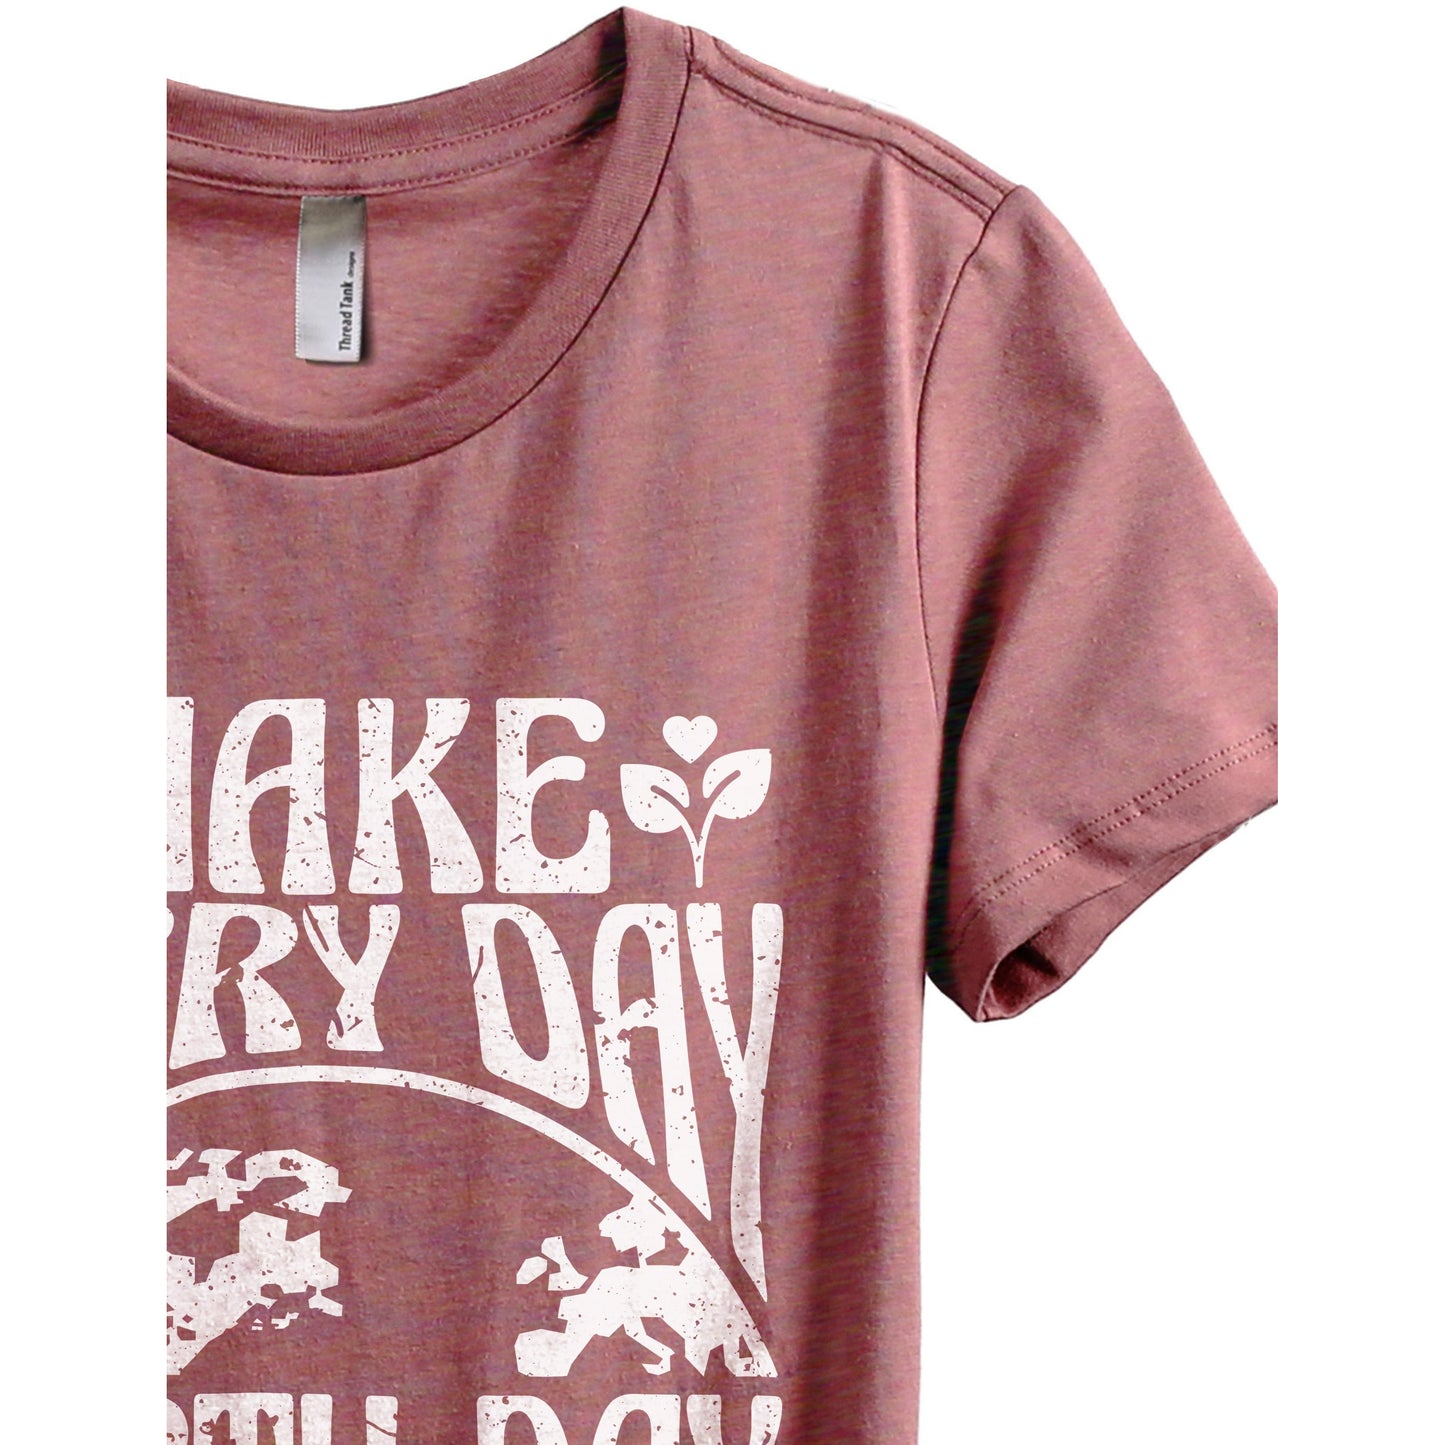 Make Every Day Earth Day - Stories You Can Wear by Thread Tank